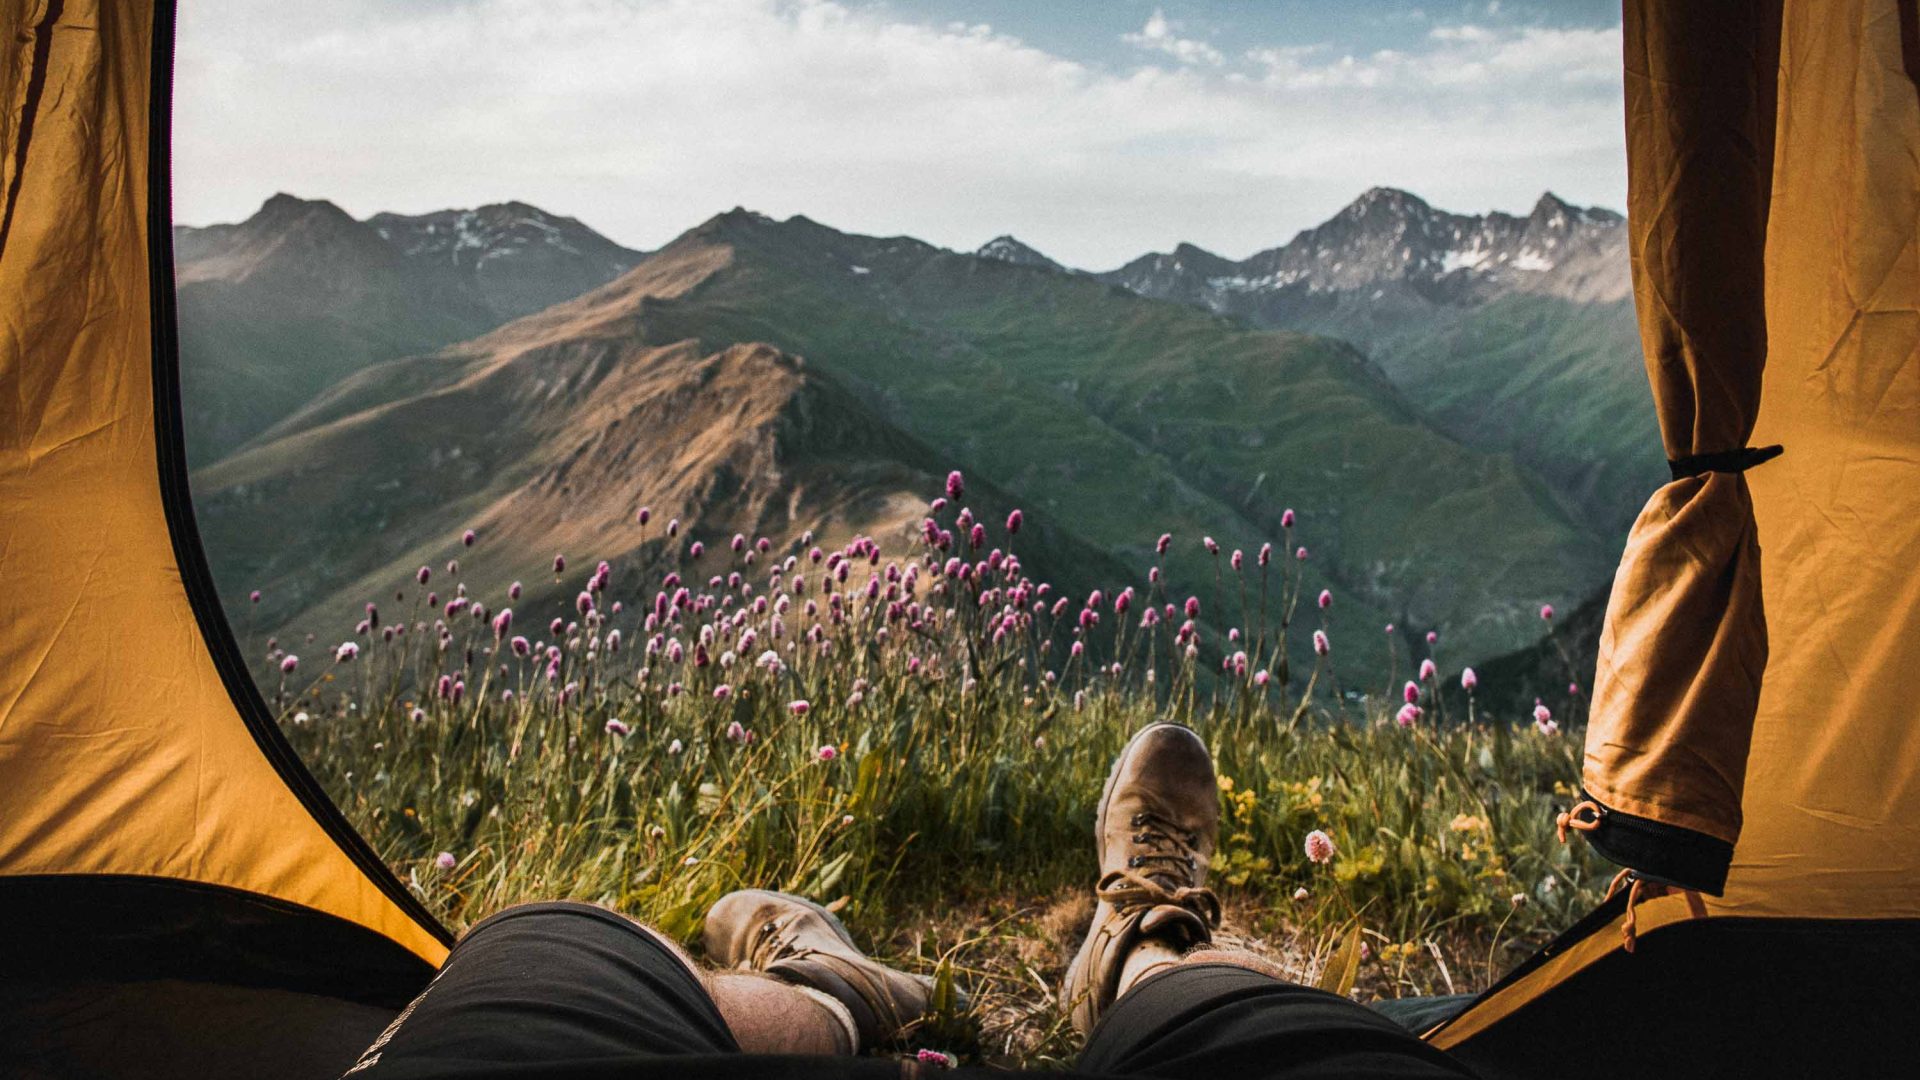 A persons feet are sticking out of a tent that has views over mountains and wildflowers.